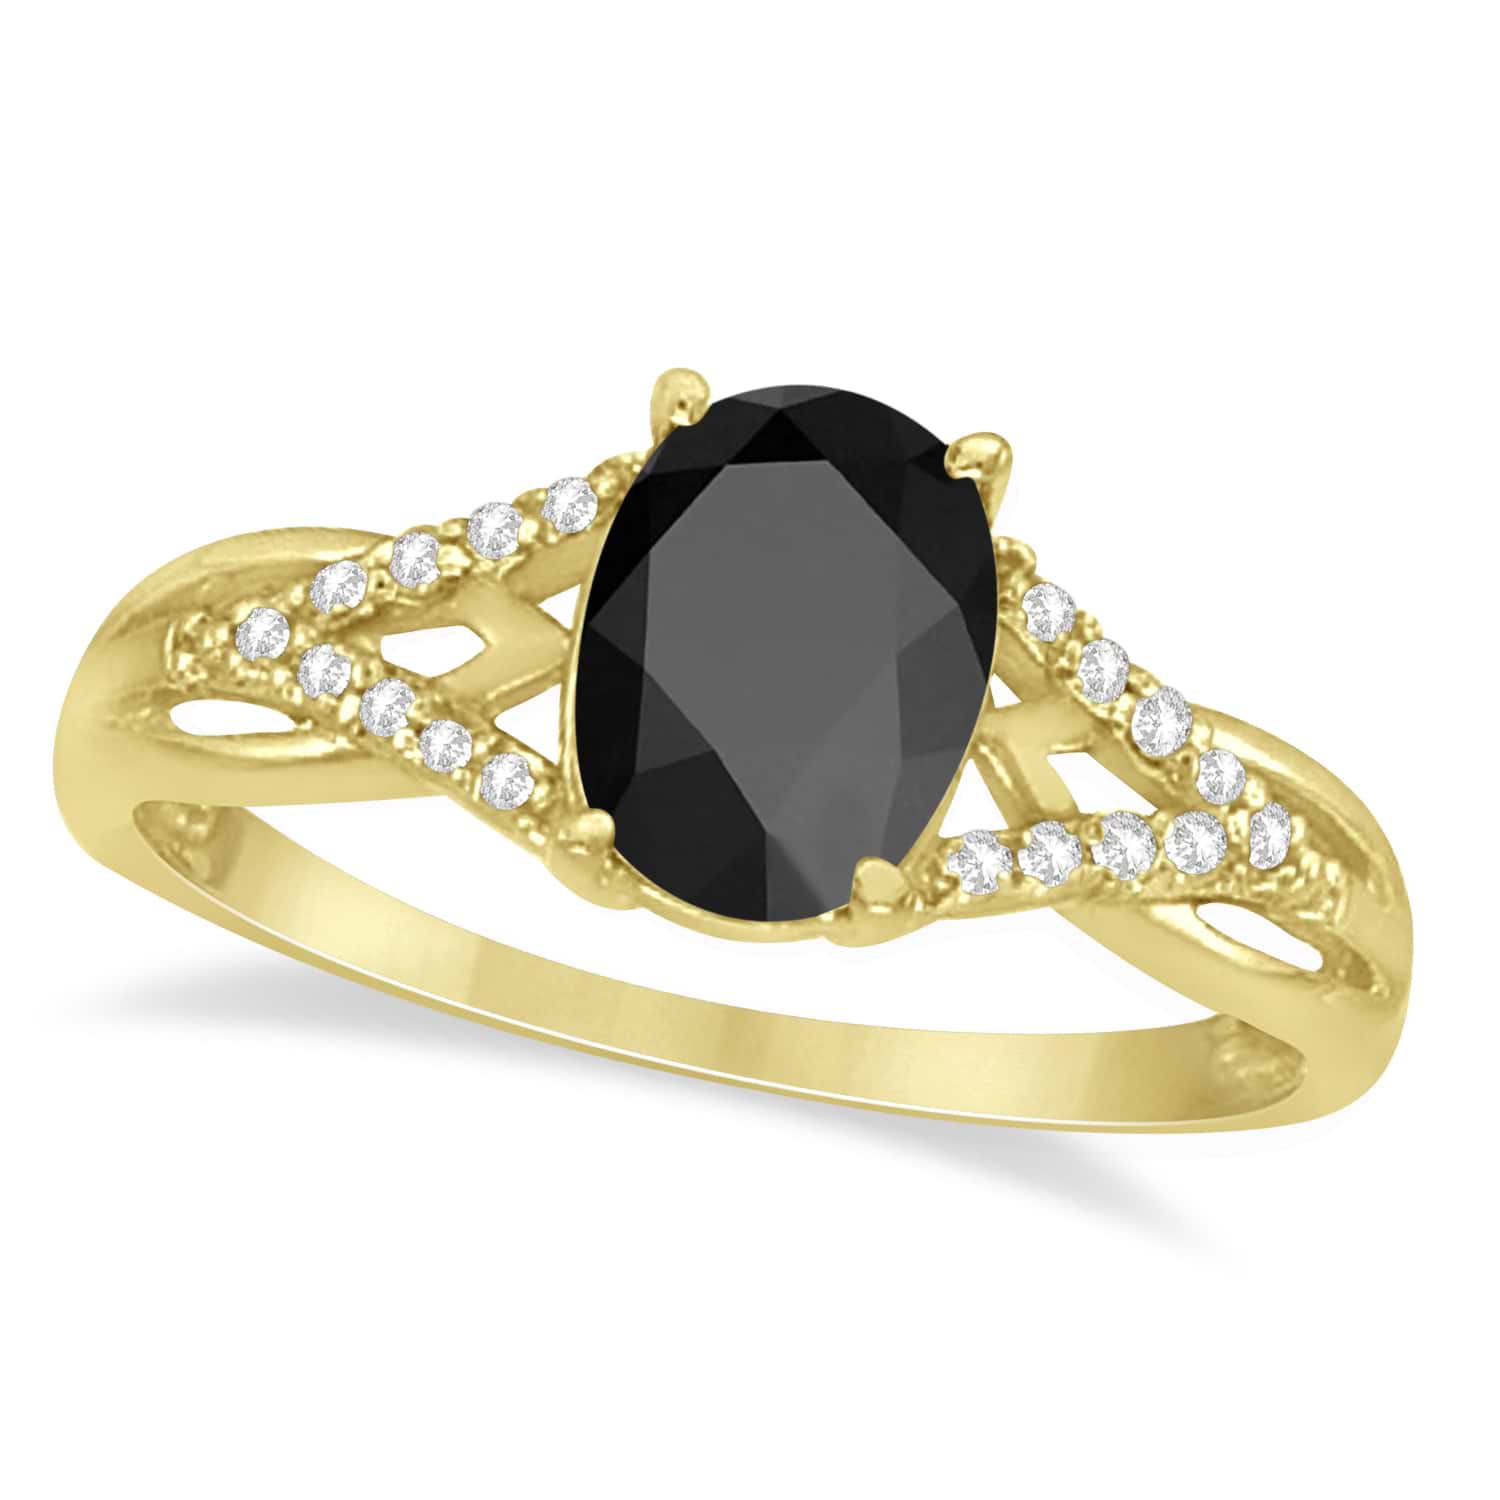 Oval Black Onyx and Diamond Cocktail Ring 14K Yellow Gold (1.62tcw)